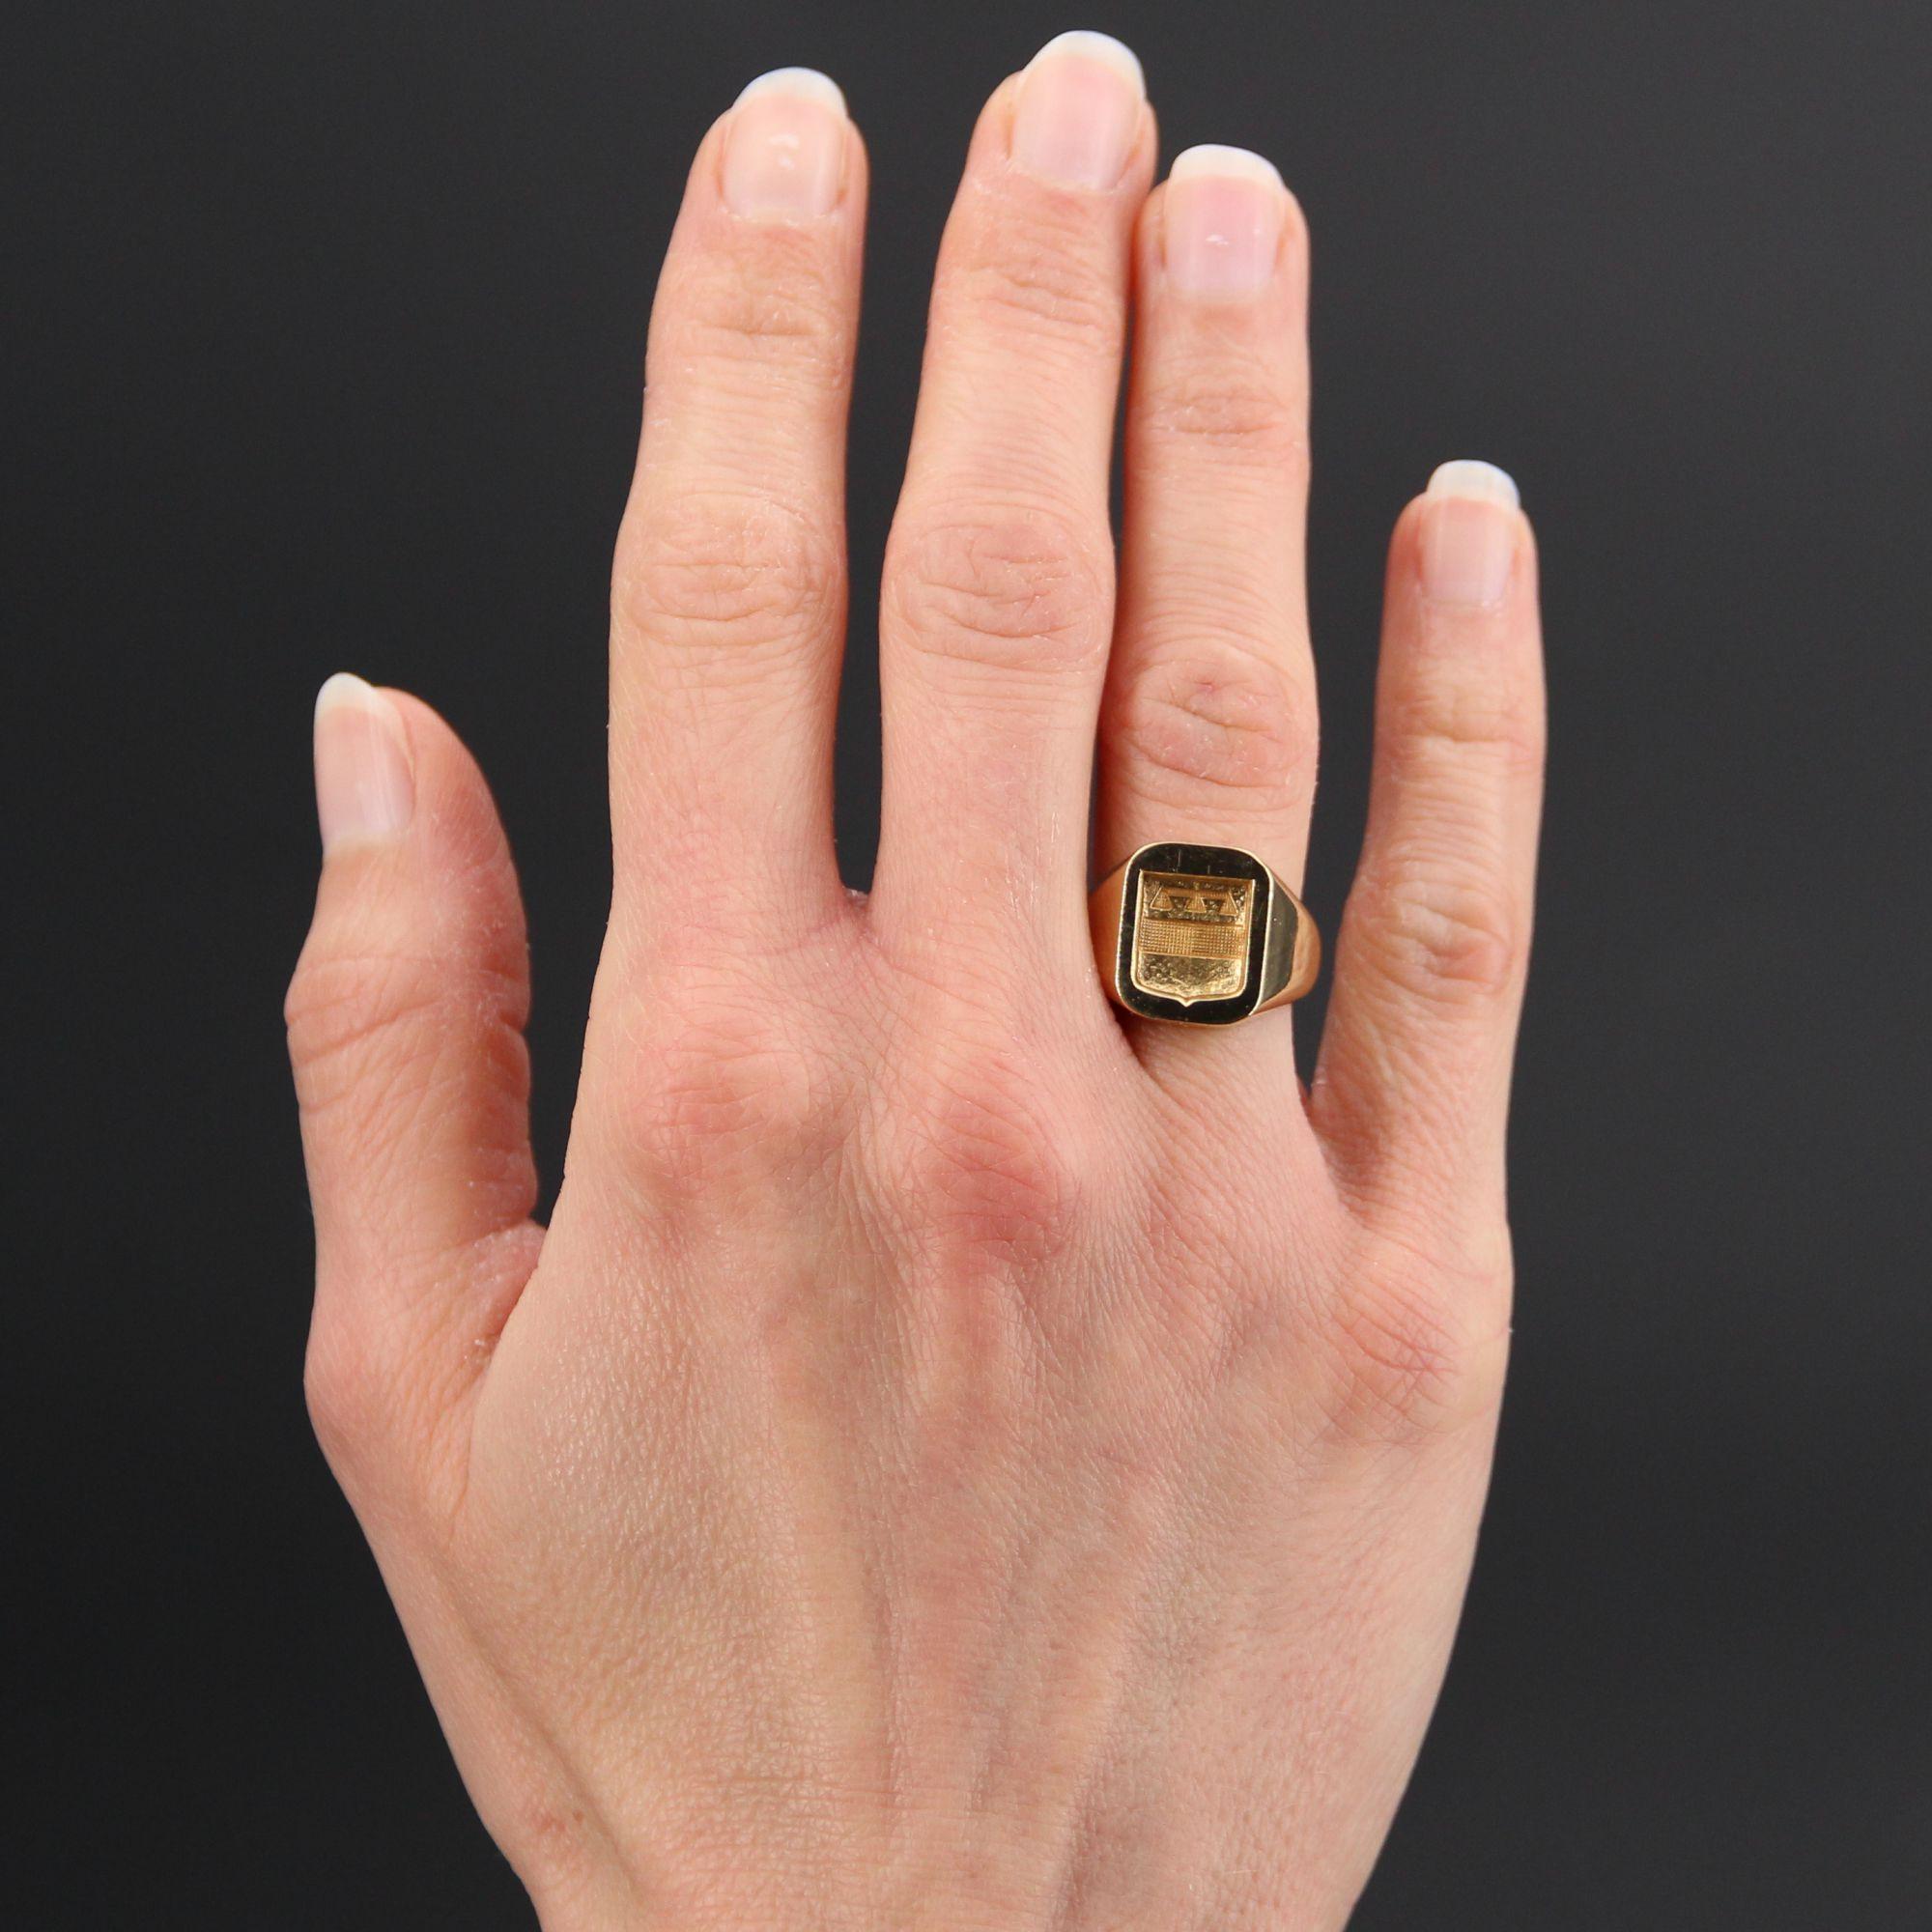 Ring in 18 karat yellow gold, eagle head hallmark.
This men's or women's signet ring is decorated with a cartouche with a coat of arms.
Height : 13.7 mm, width : 11.6 mm, thickness : 2.6 mm, width of the ring at the base : 4.5 mm.
Total weight of